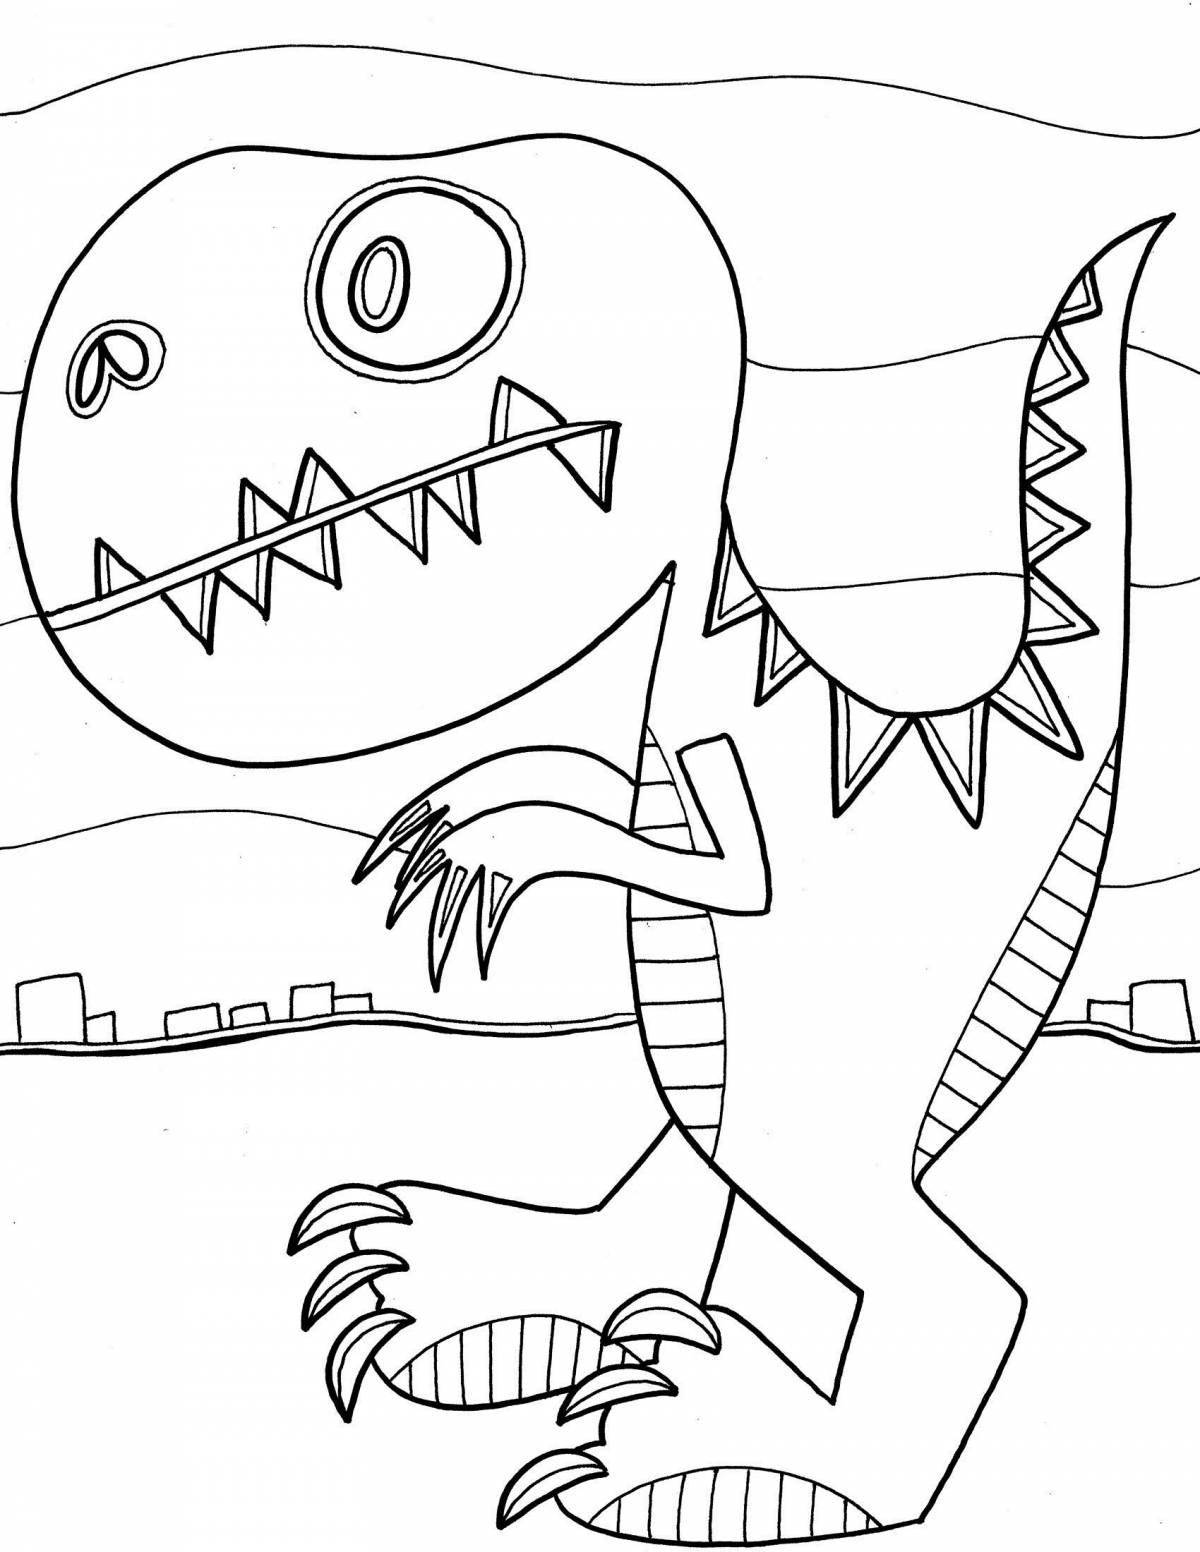 Coloring page with colorful critters